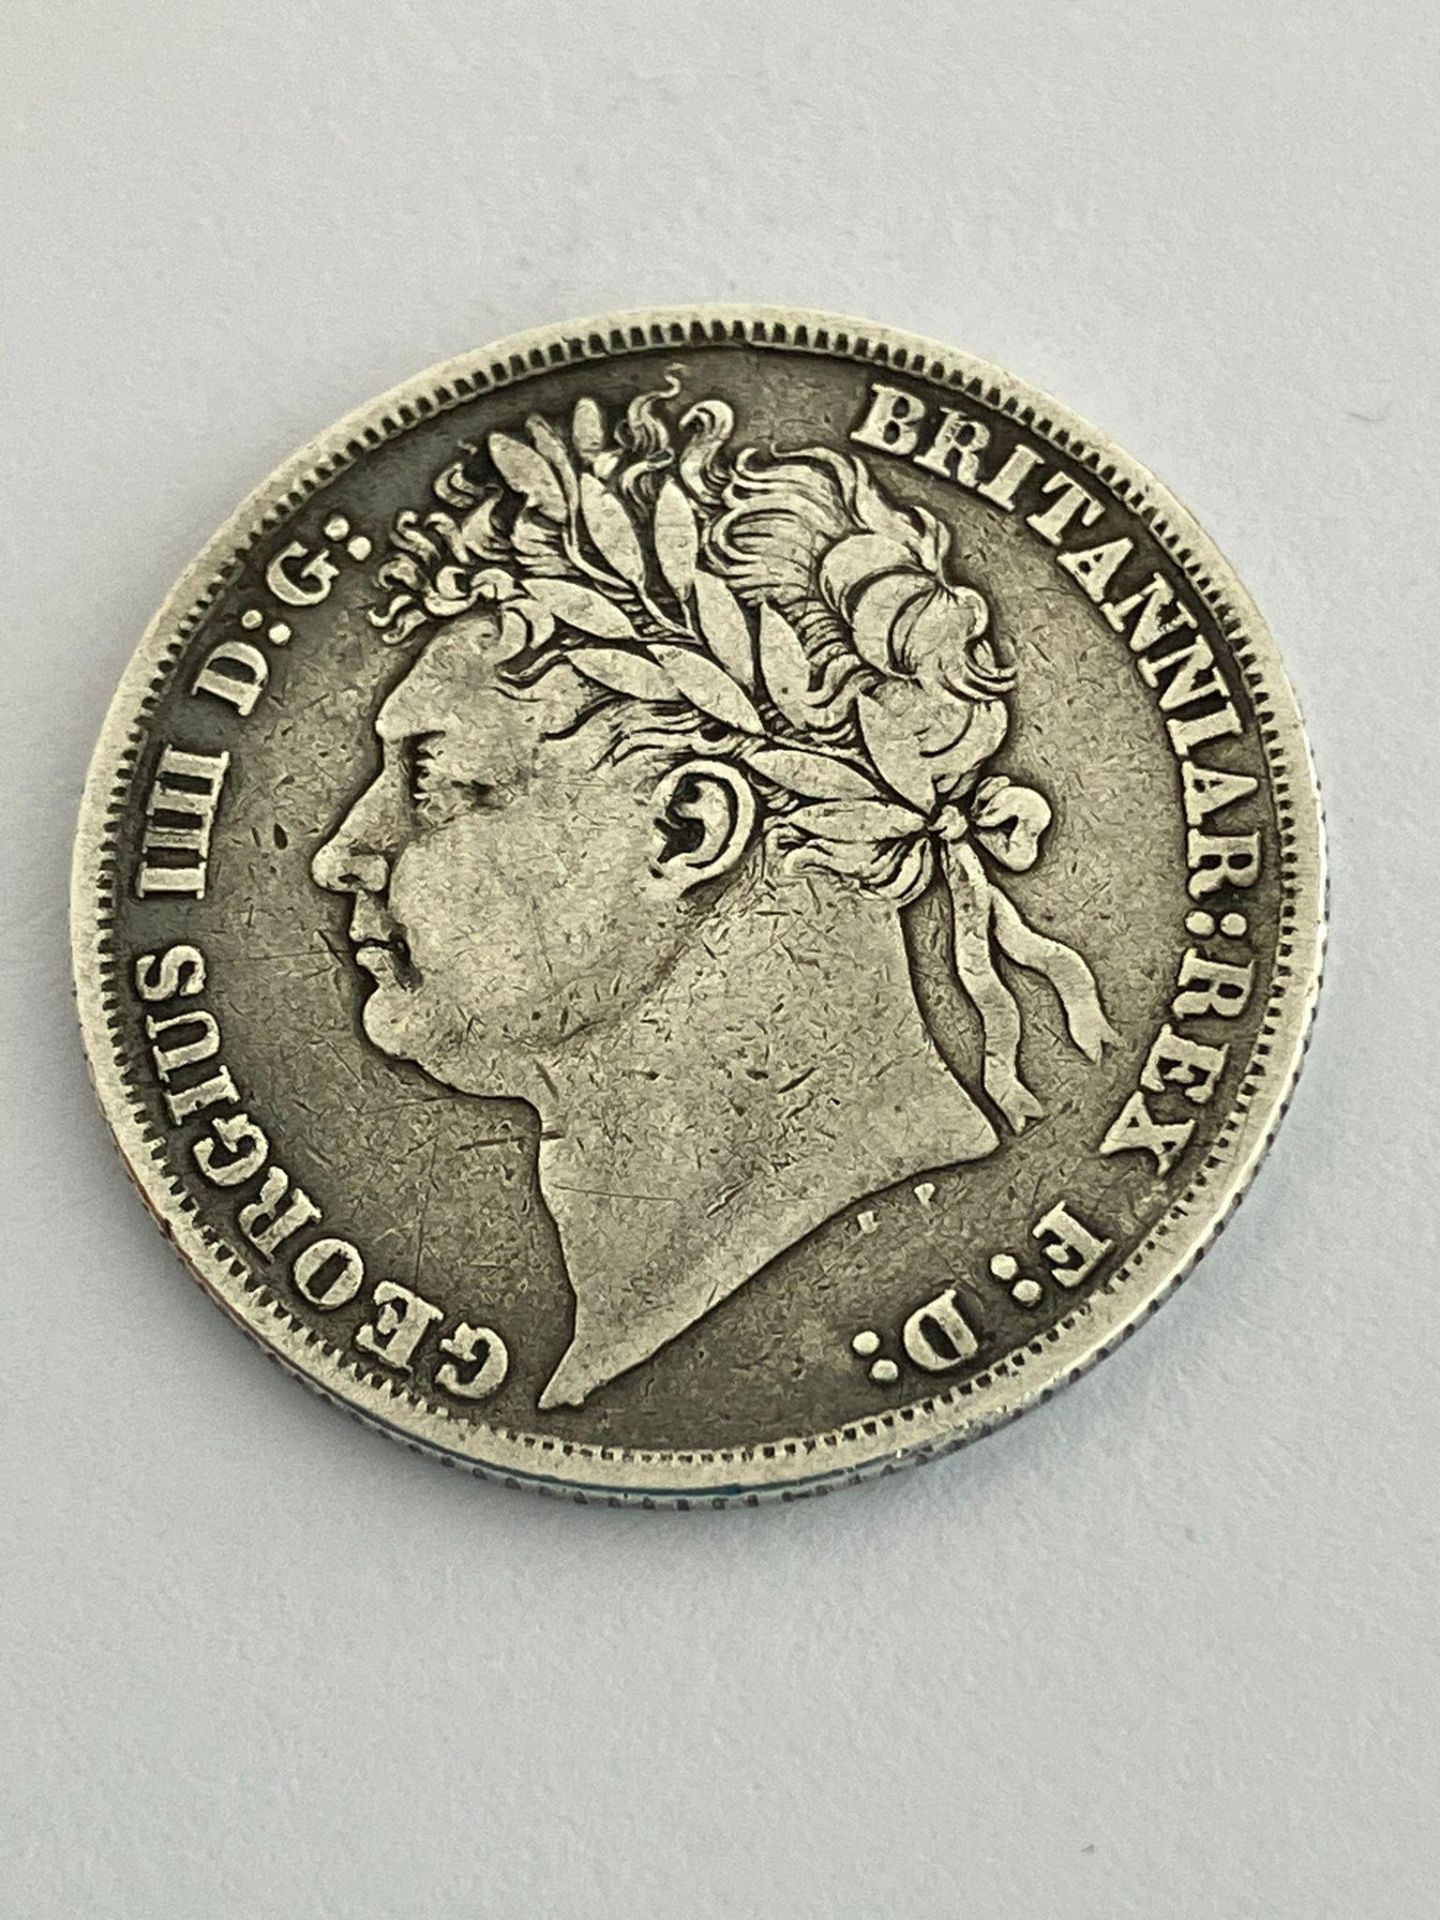 1824 GEORGE IV SILVER SHILLING. Overall condition fine or better, with clear detail to both sides.